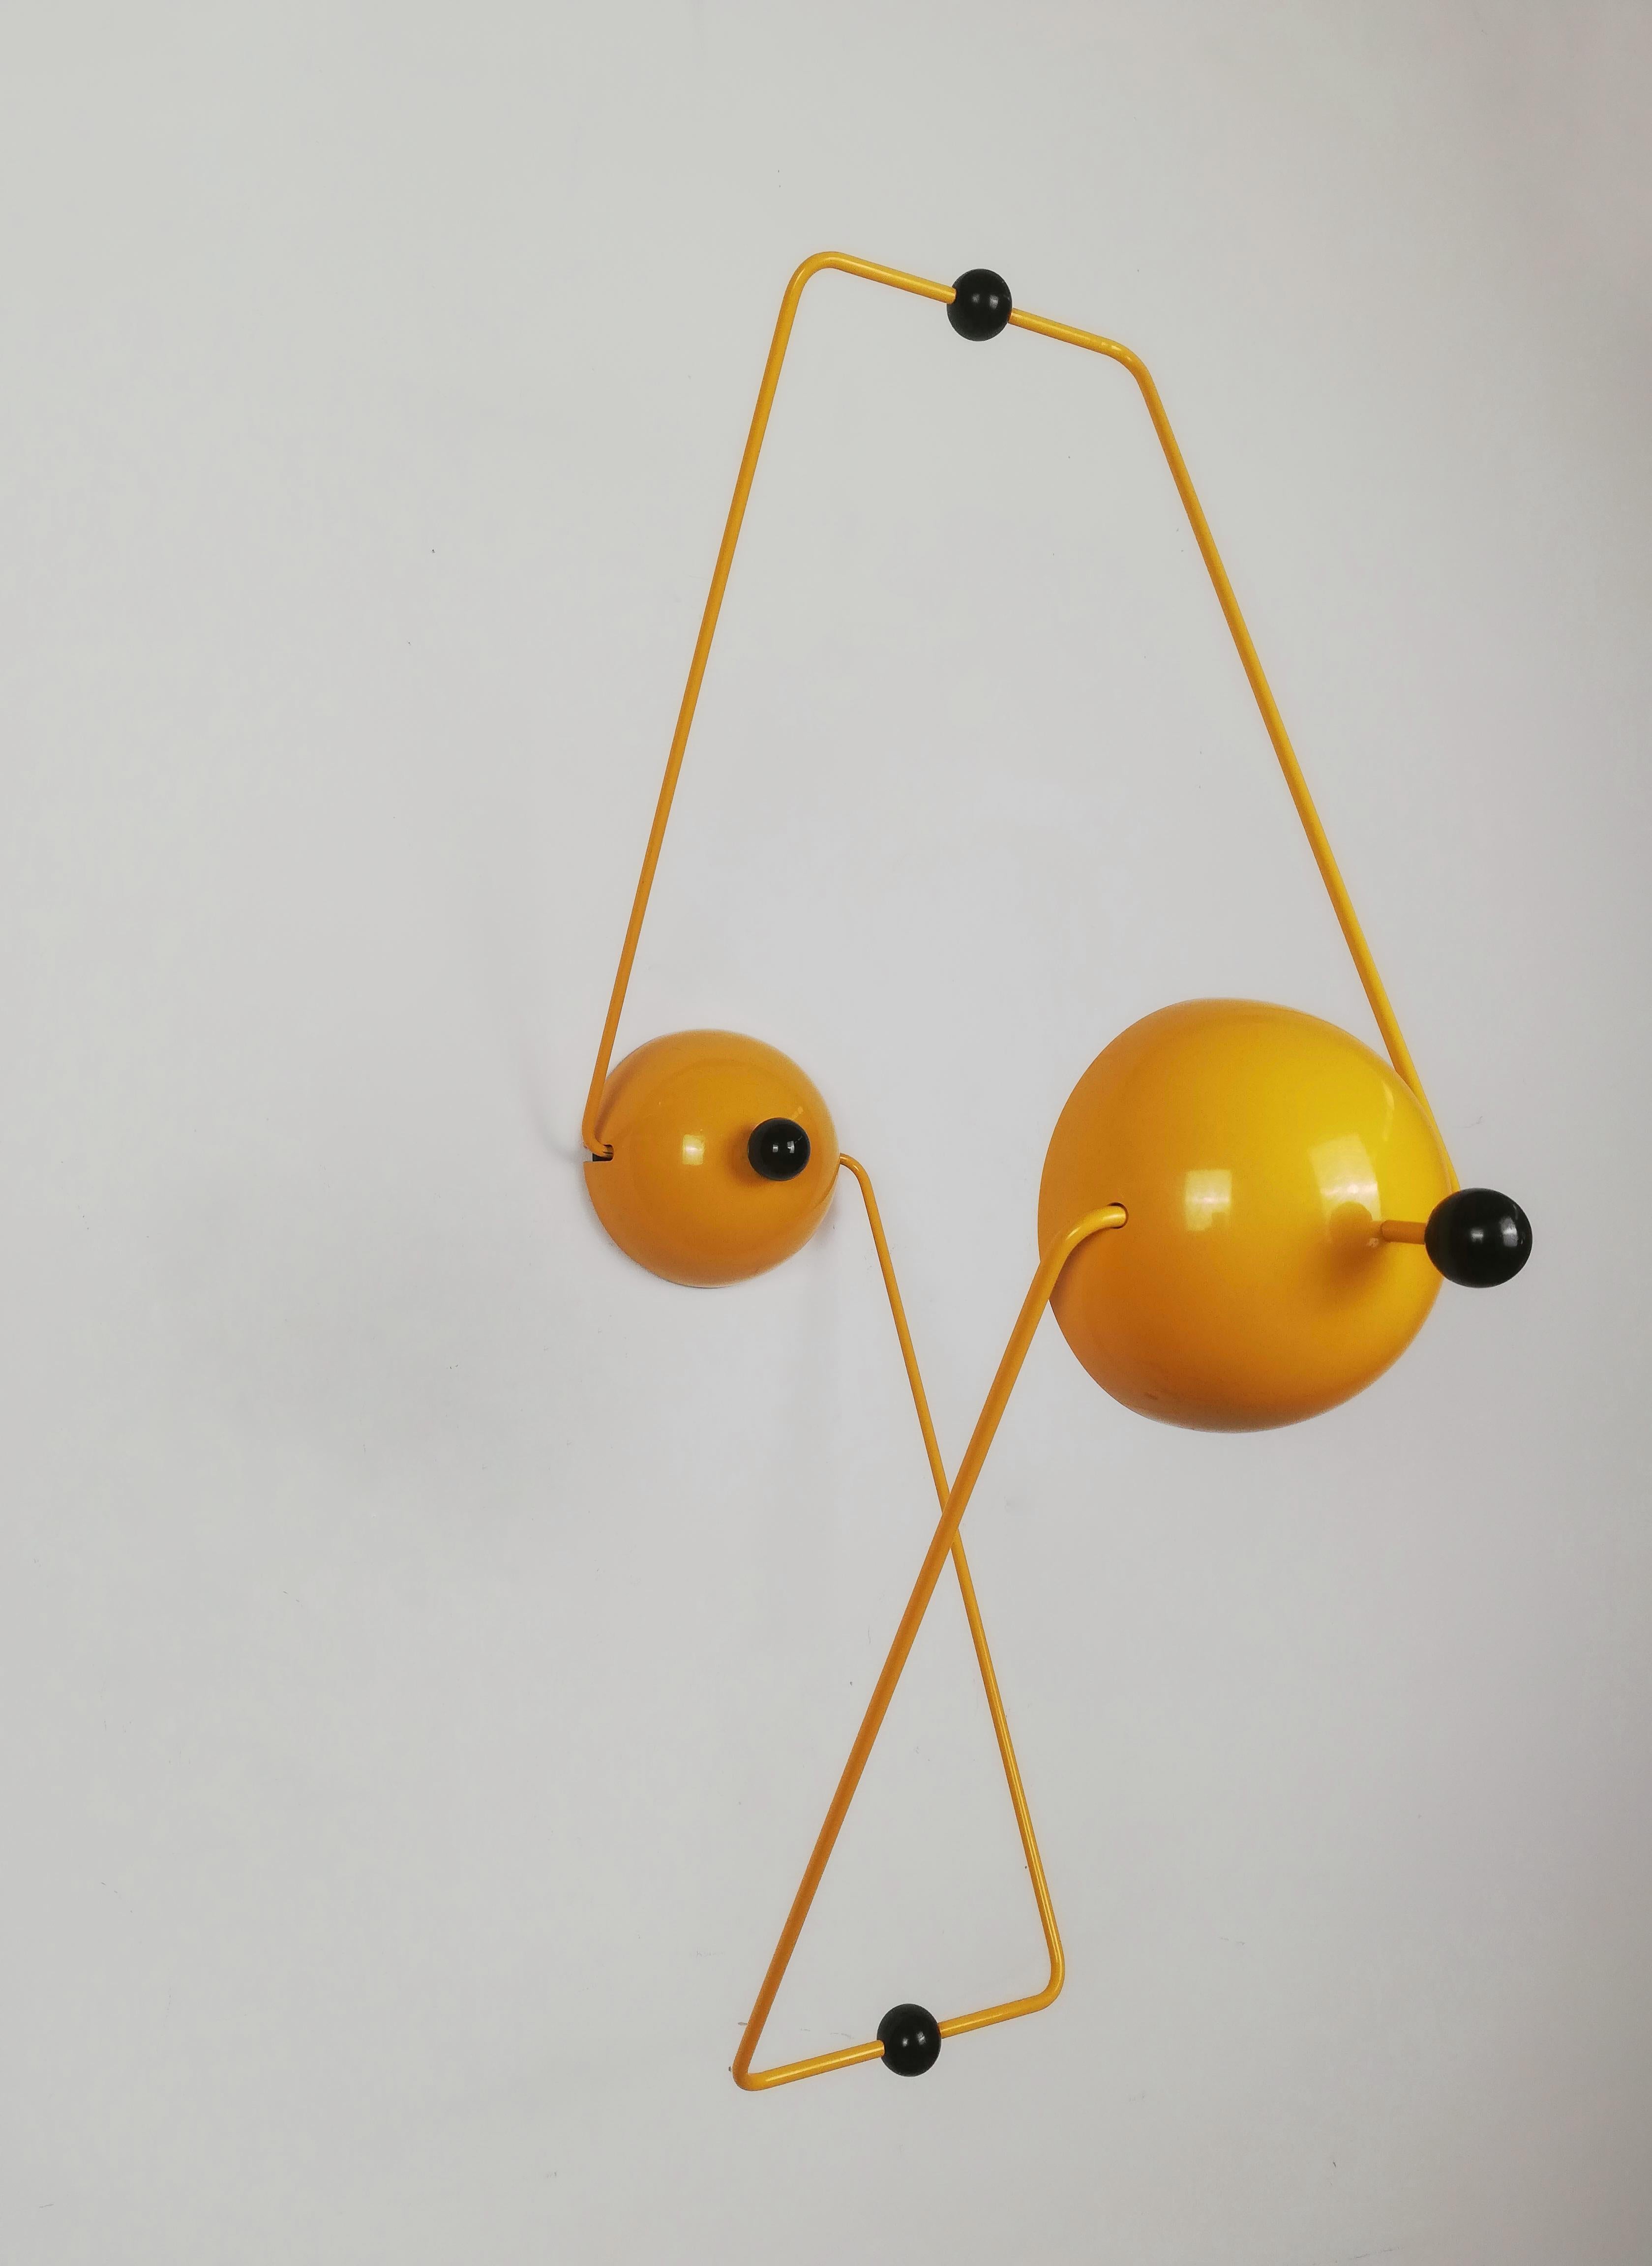 A Post modern wall light, made in Italy during the Memphis Era, and therefore made, in the full taste of the 80s with vivid colors and playful shape.
The style of this wall lamp recall the productions of Toshiyuki Kita, It was made in yellow